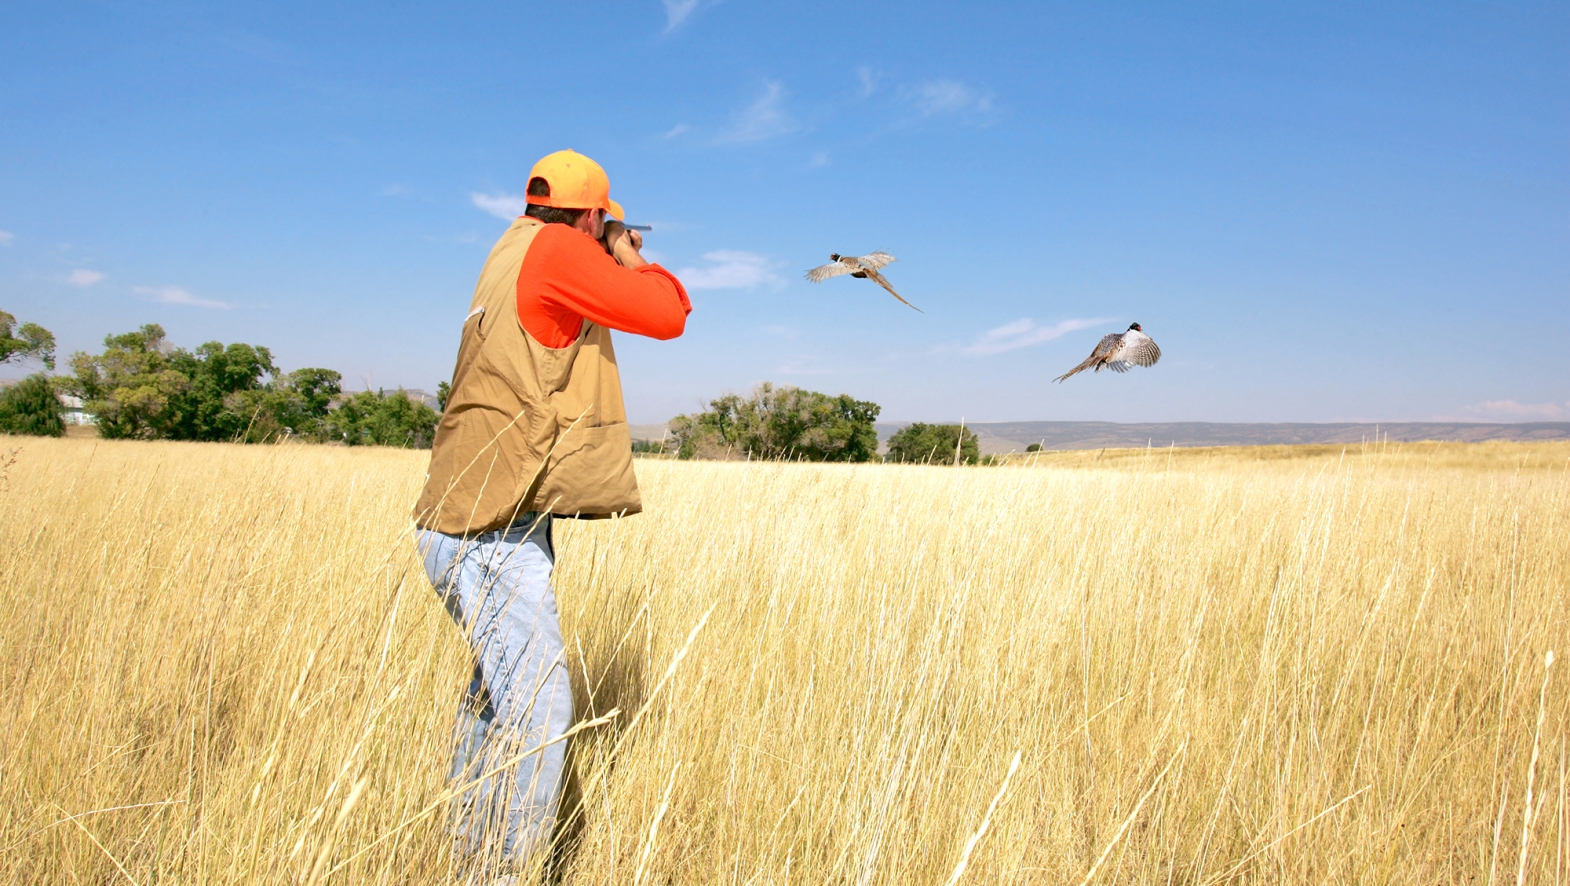 Luxury, members-only guided pheasant hunting experiences